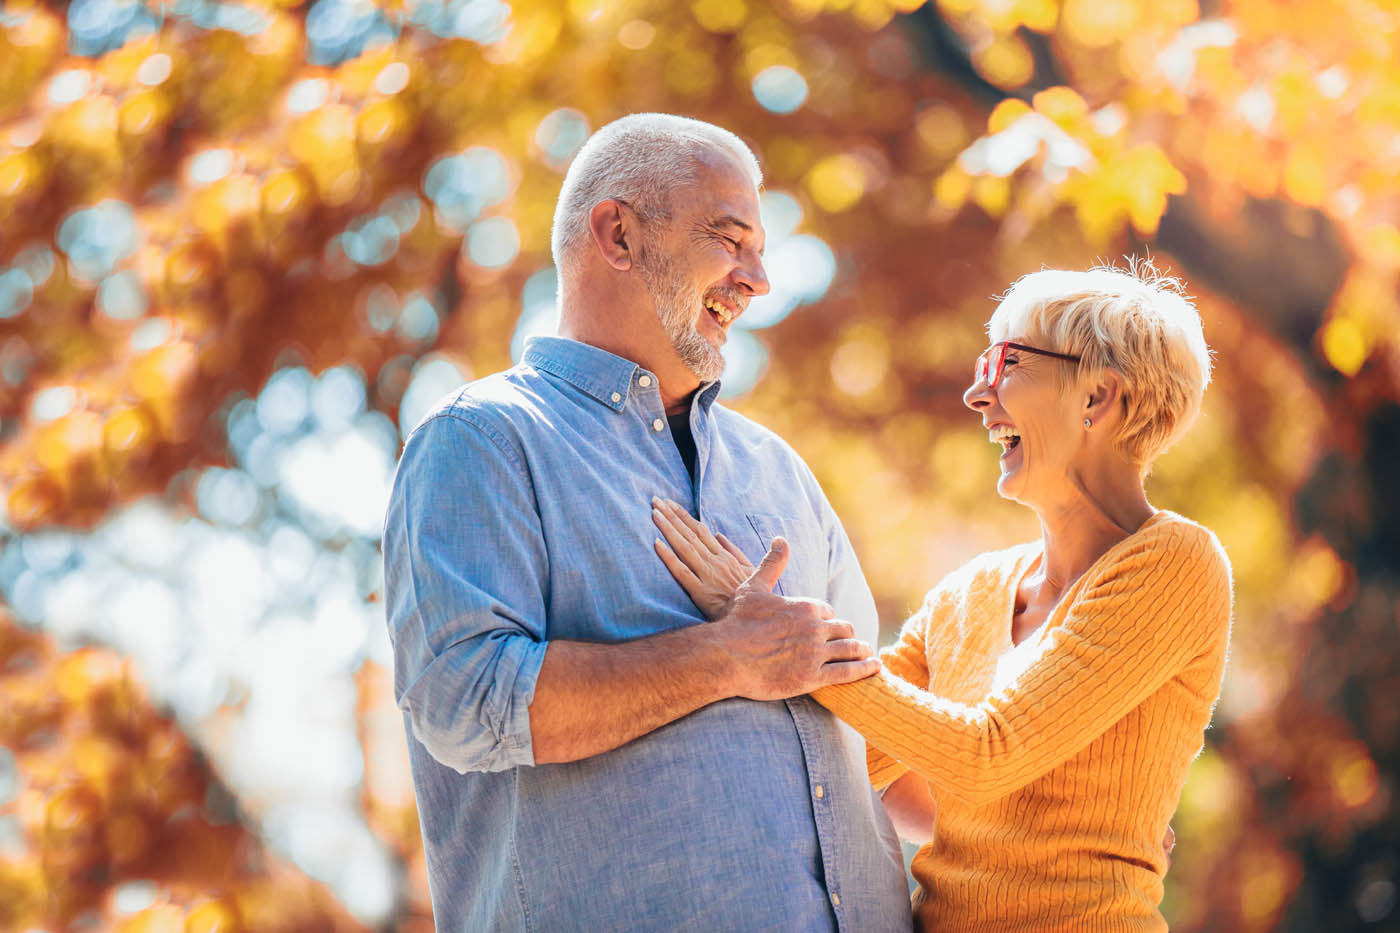 Two older people outside in the fall weather - loving each other and the affects of bbl photofacial in Lehi.